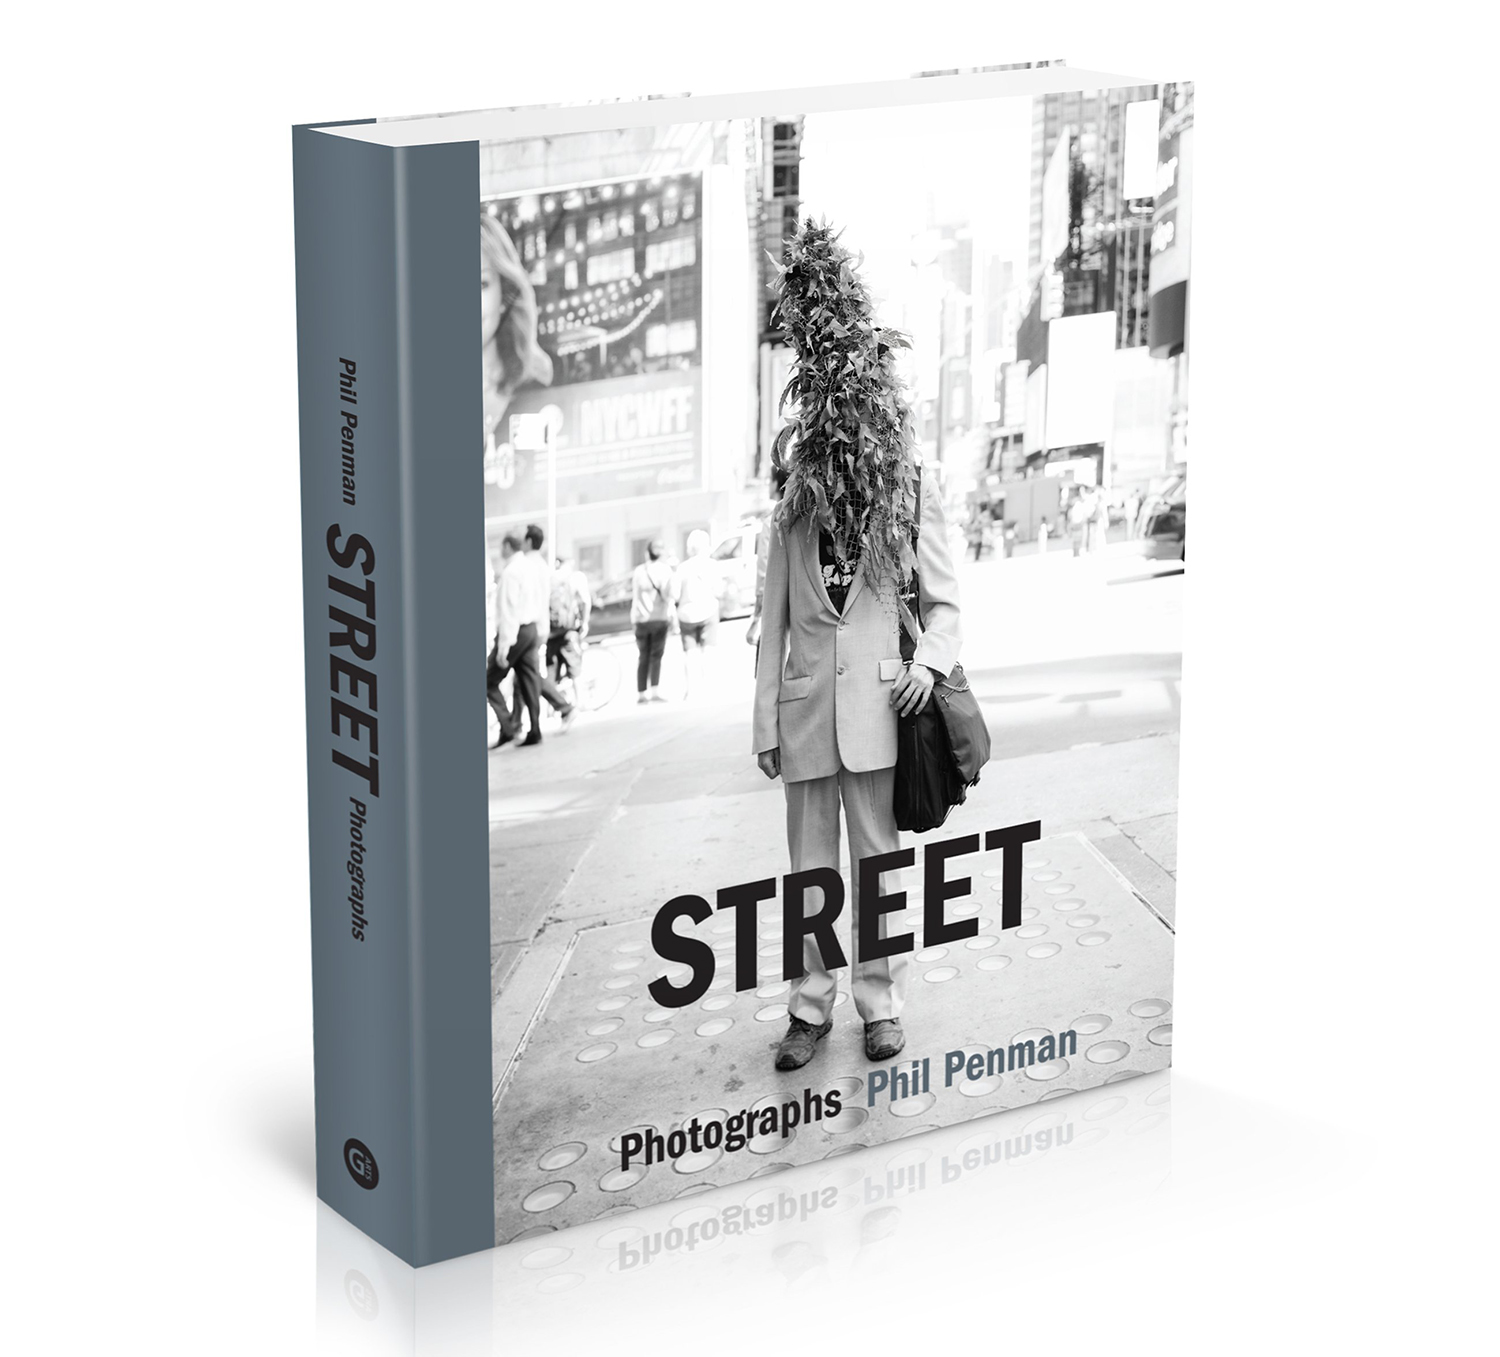 Street: Photographs by Phil Penman © 2019, published by G ARTS www.glitteratieditions.com